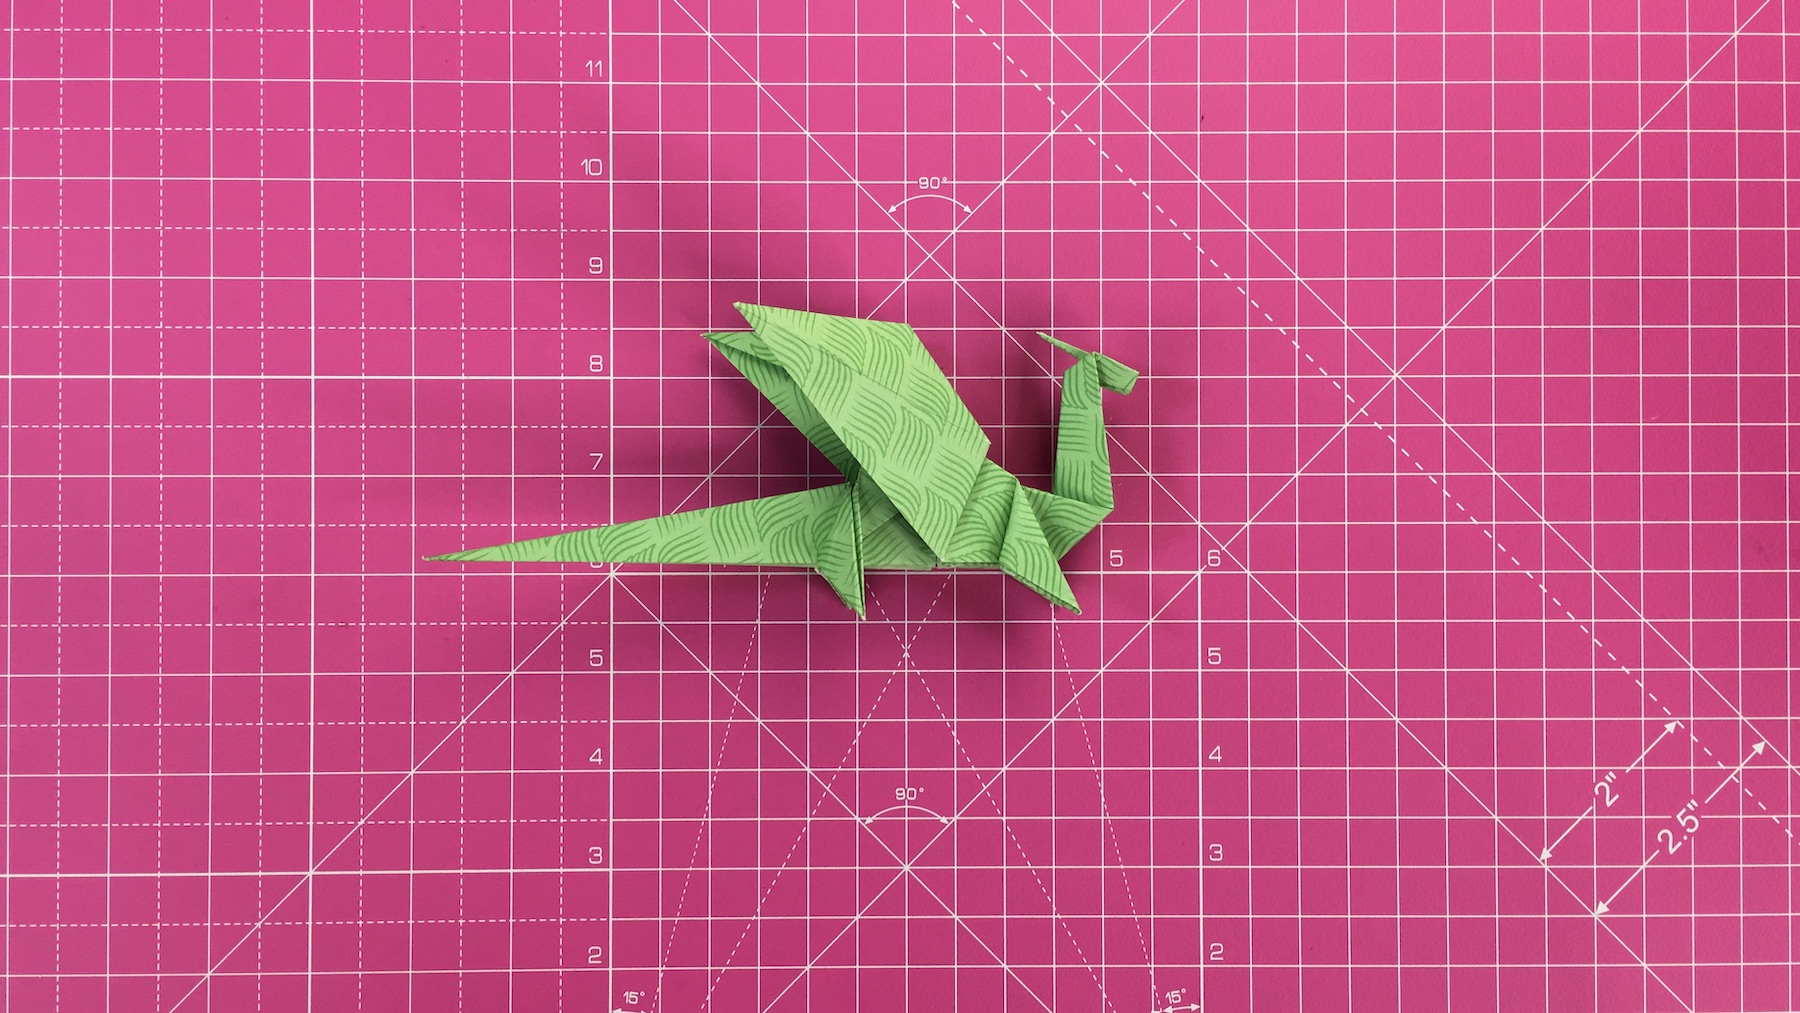 How to make an origami dragon, origami dragon tutorial - step 51